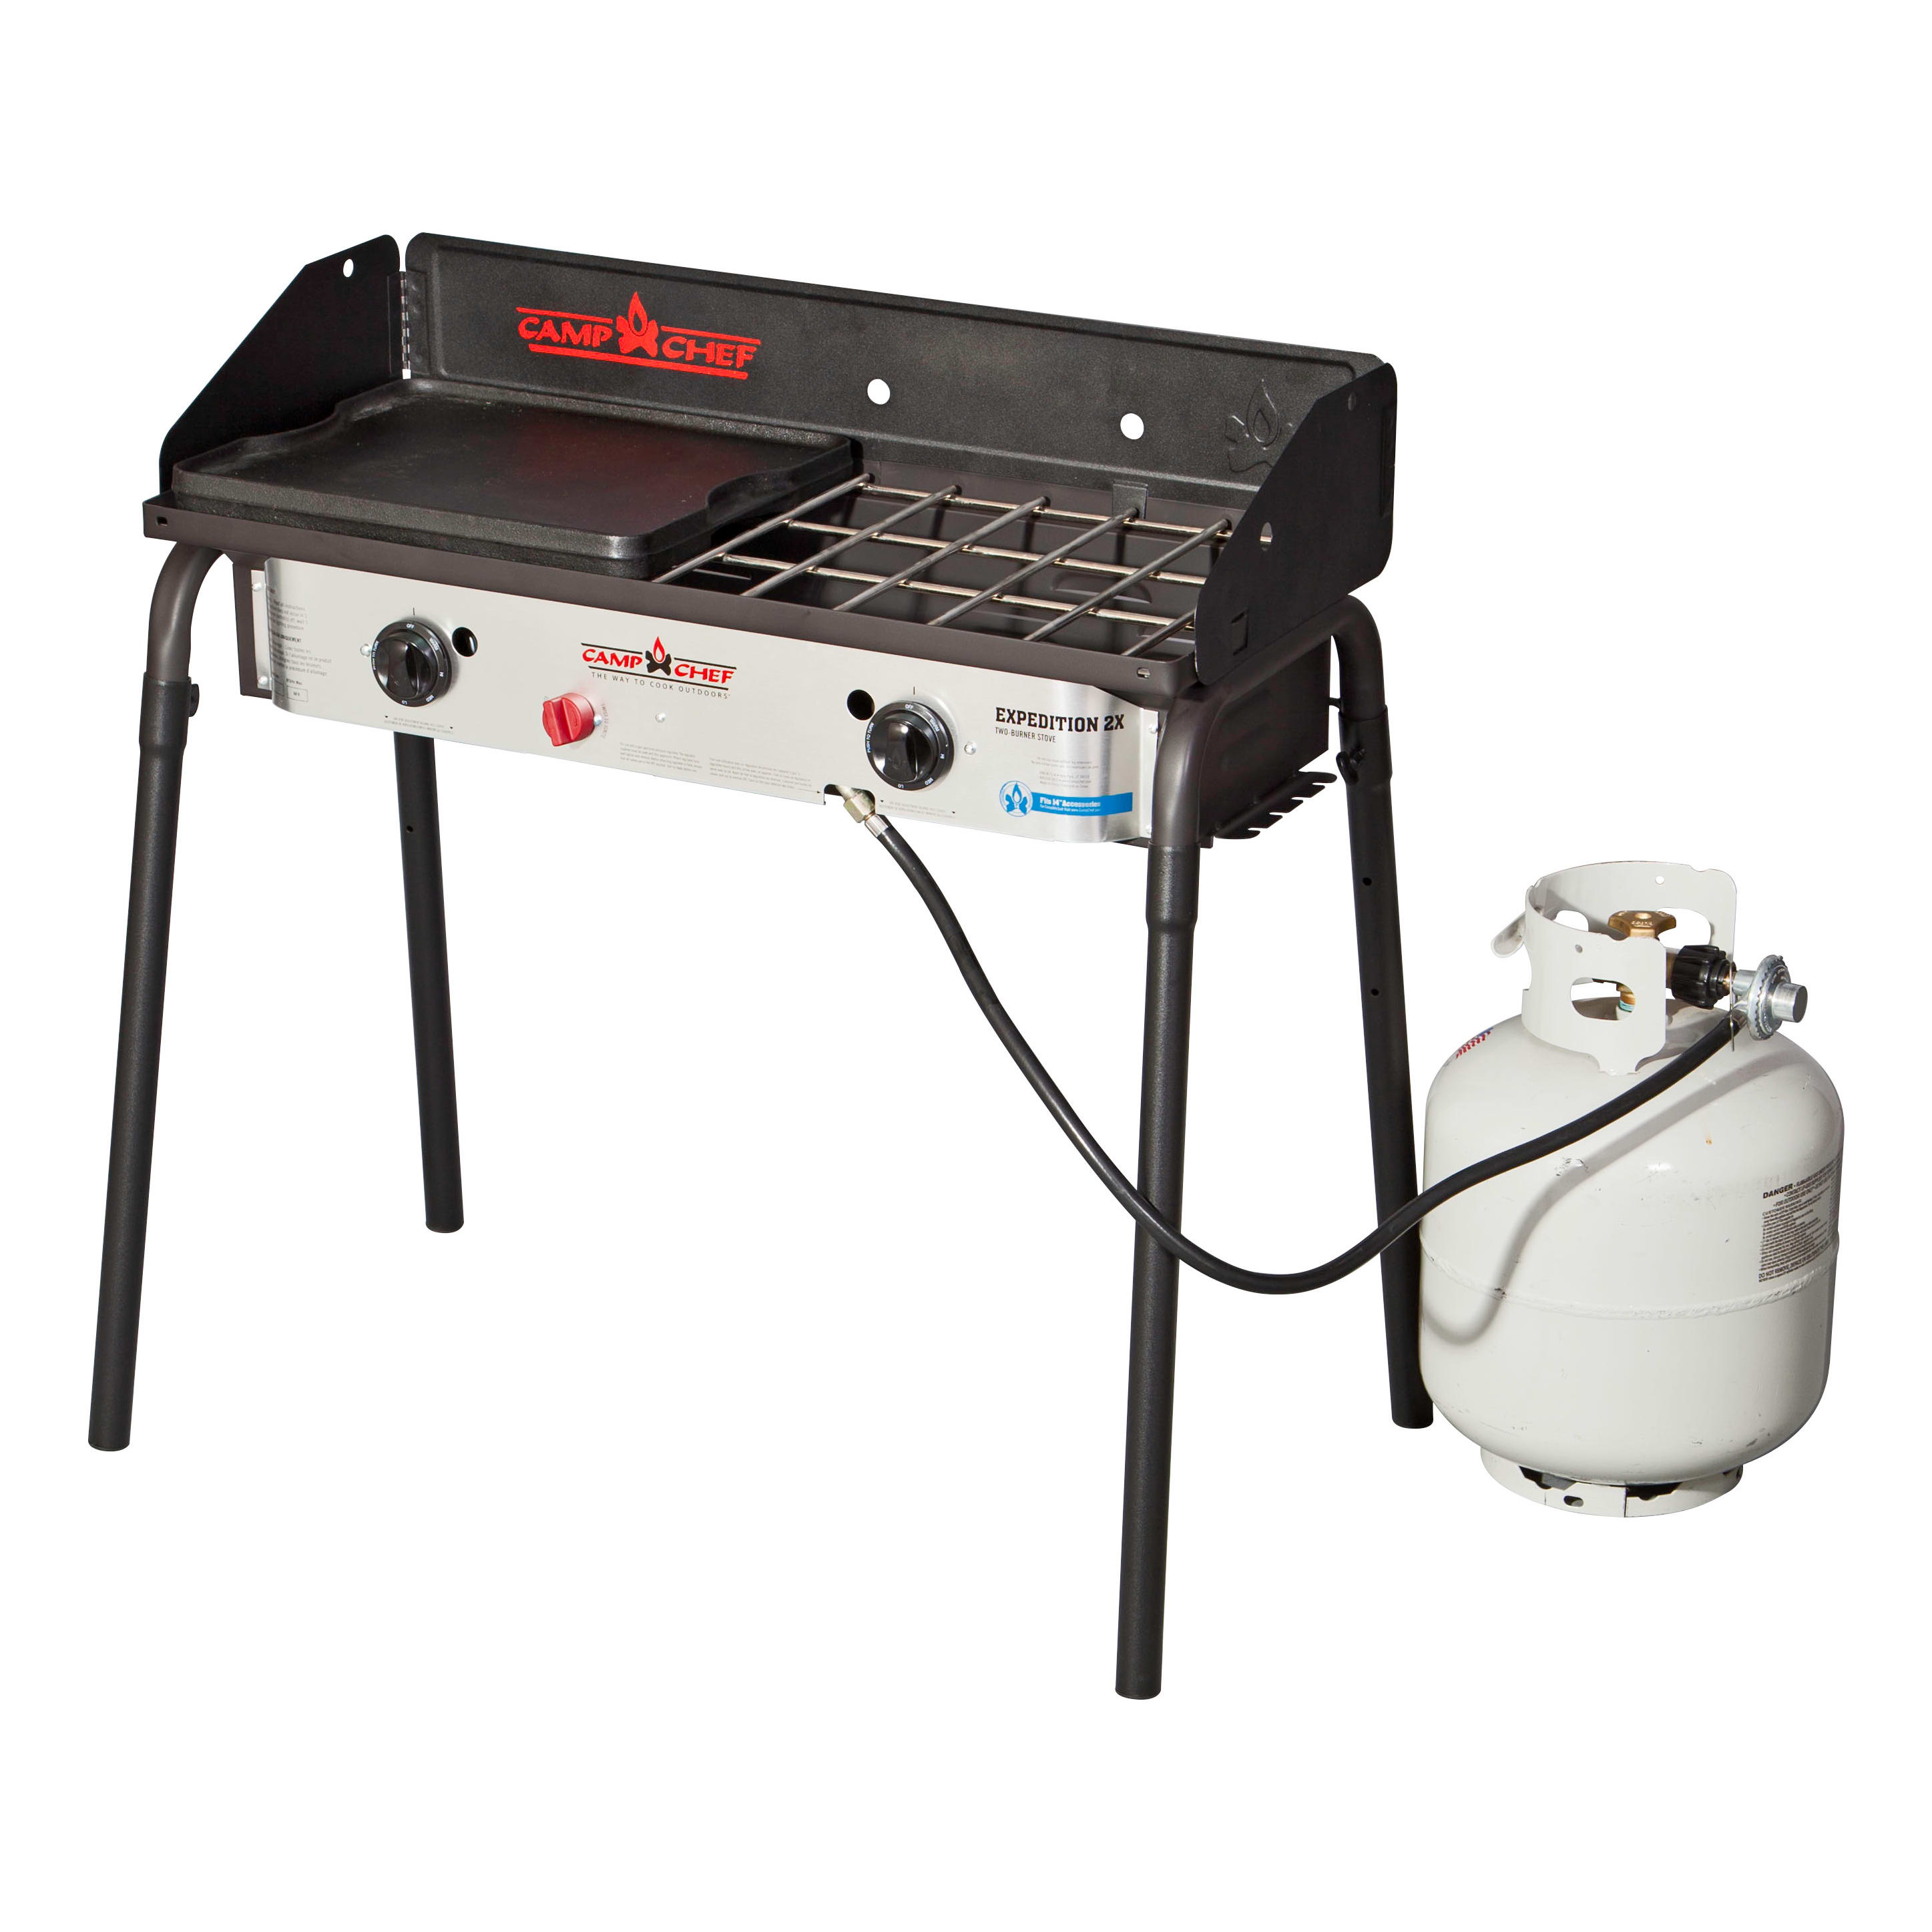 Camp Chef® Expedition 2x2 Burner Stove with Griddle